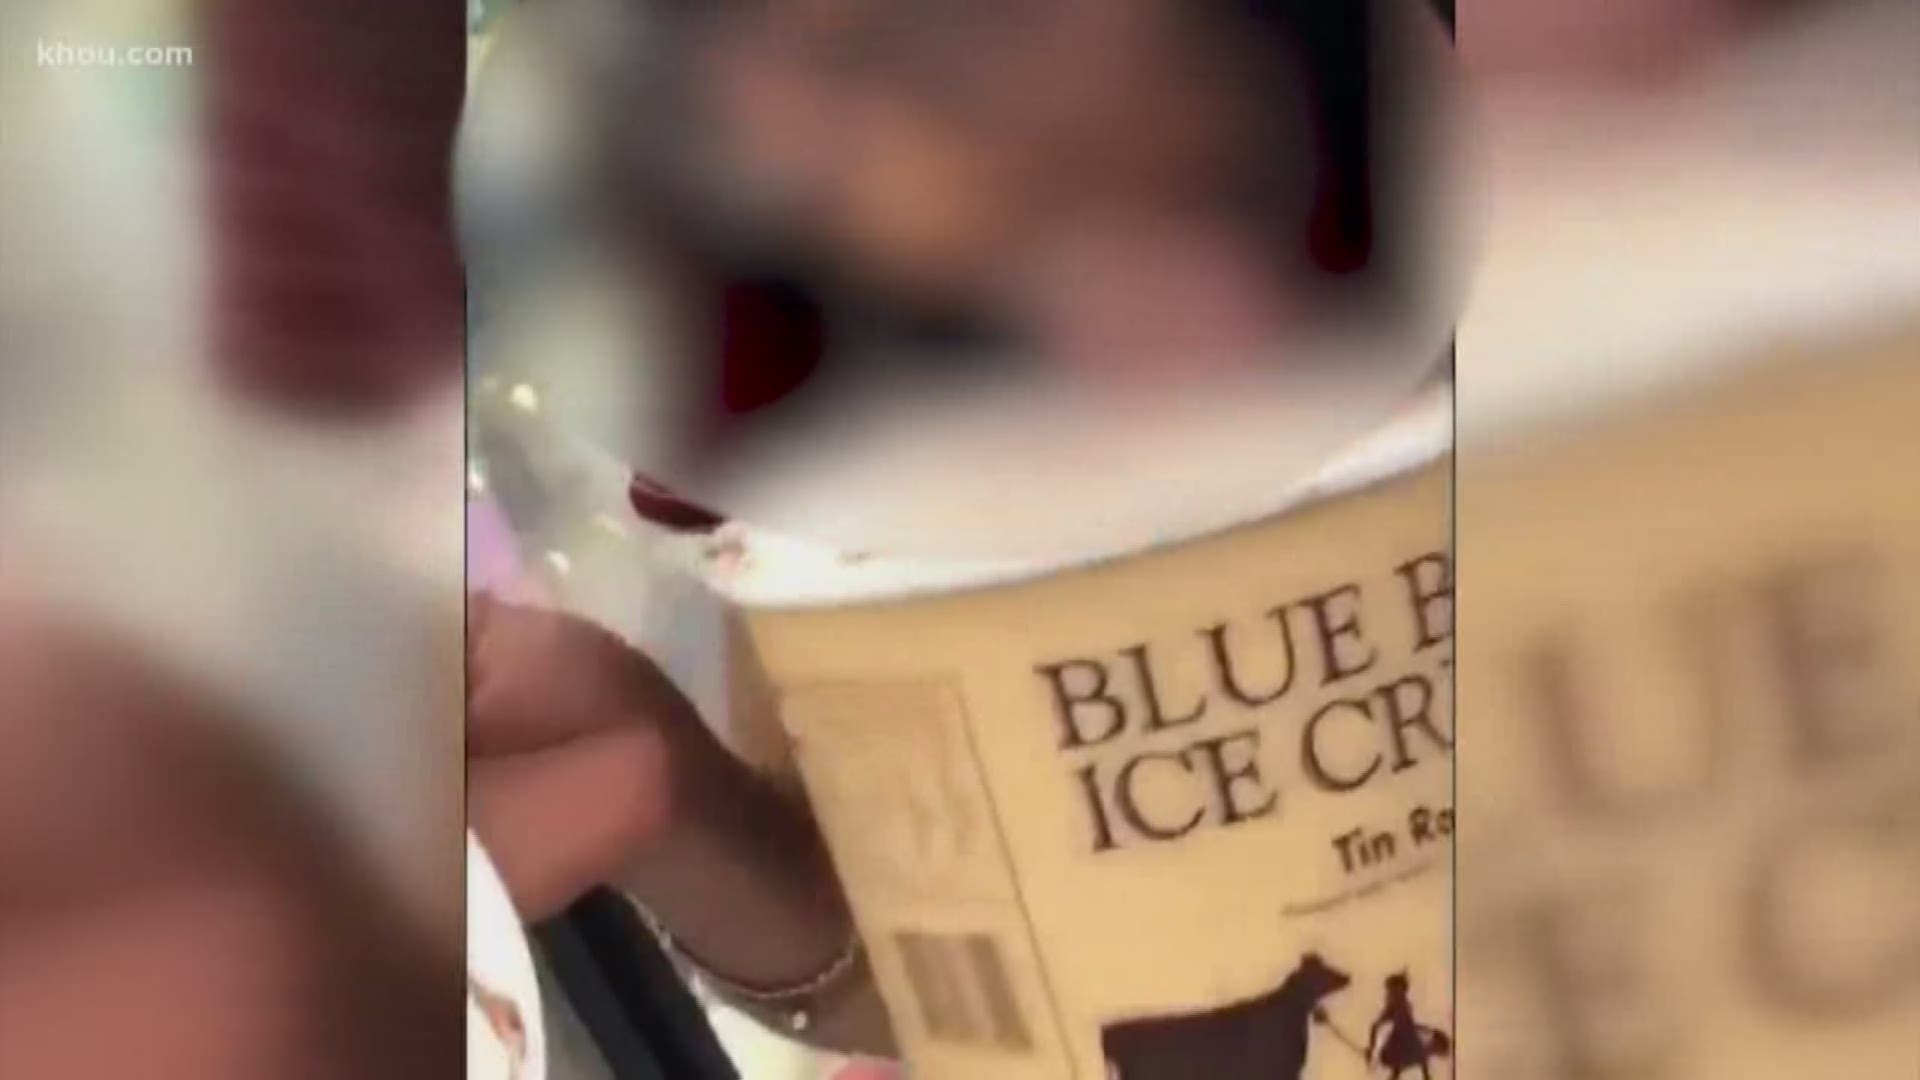 It's the viral video that grossed us all out – and it inspired copy cats. A teenager opens up a carton of Blue Bell Ice Cream, licks it, and puts it back in the freezer. So, could a response to the viral video end up costing you money at the grocery store? Let's verify.